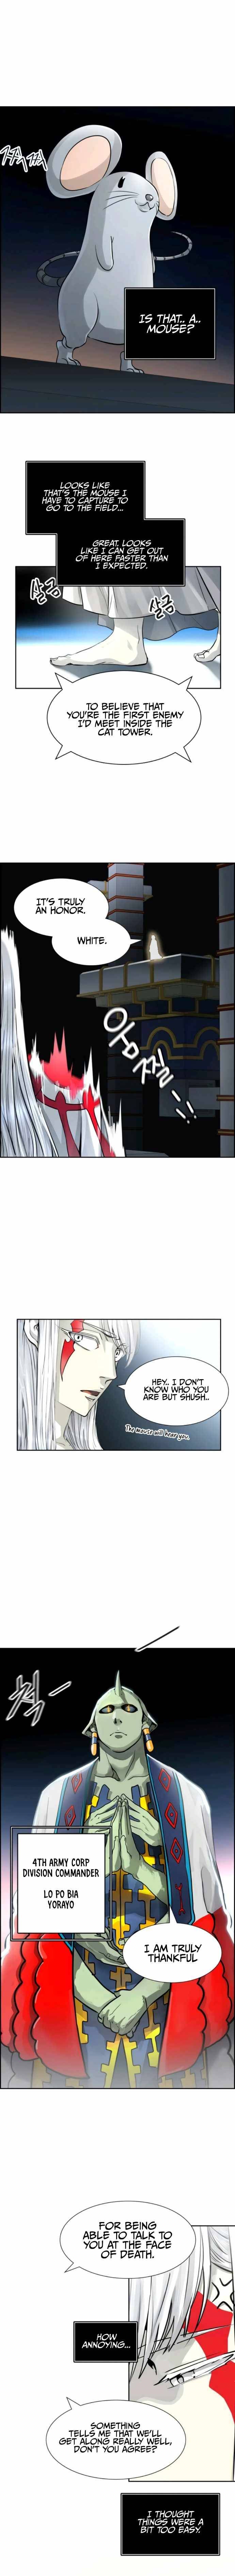 Tower of God Chapter 487 page 17